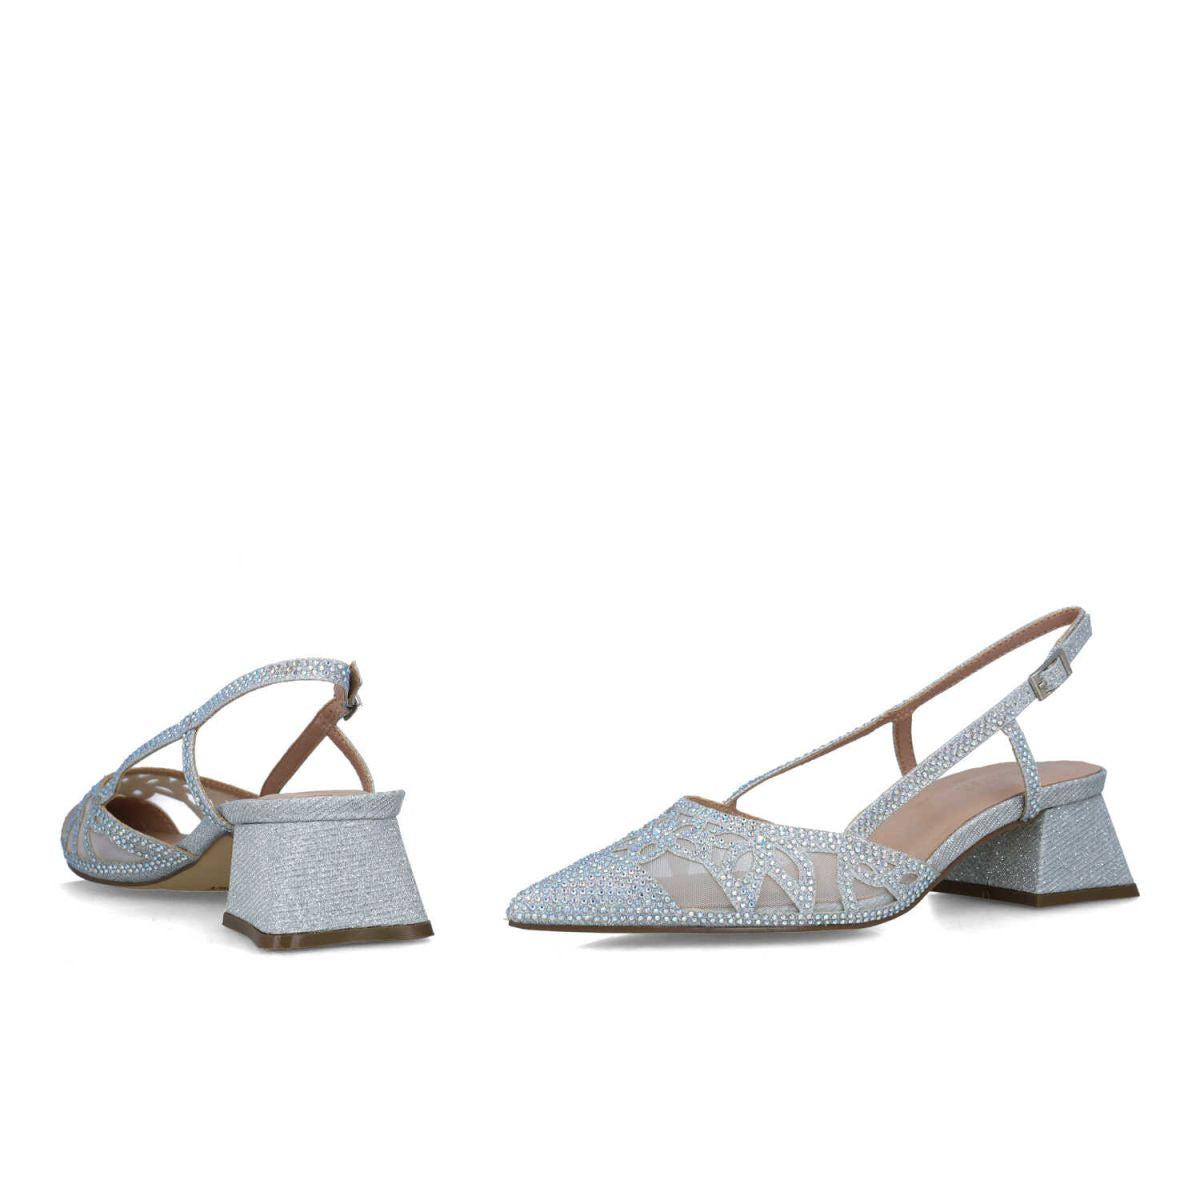 Diagonal perspective of the silver low block heel sandals, highlighting the pointed toe and slingback design.